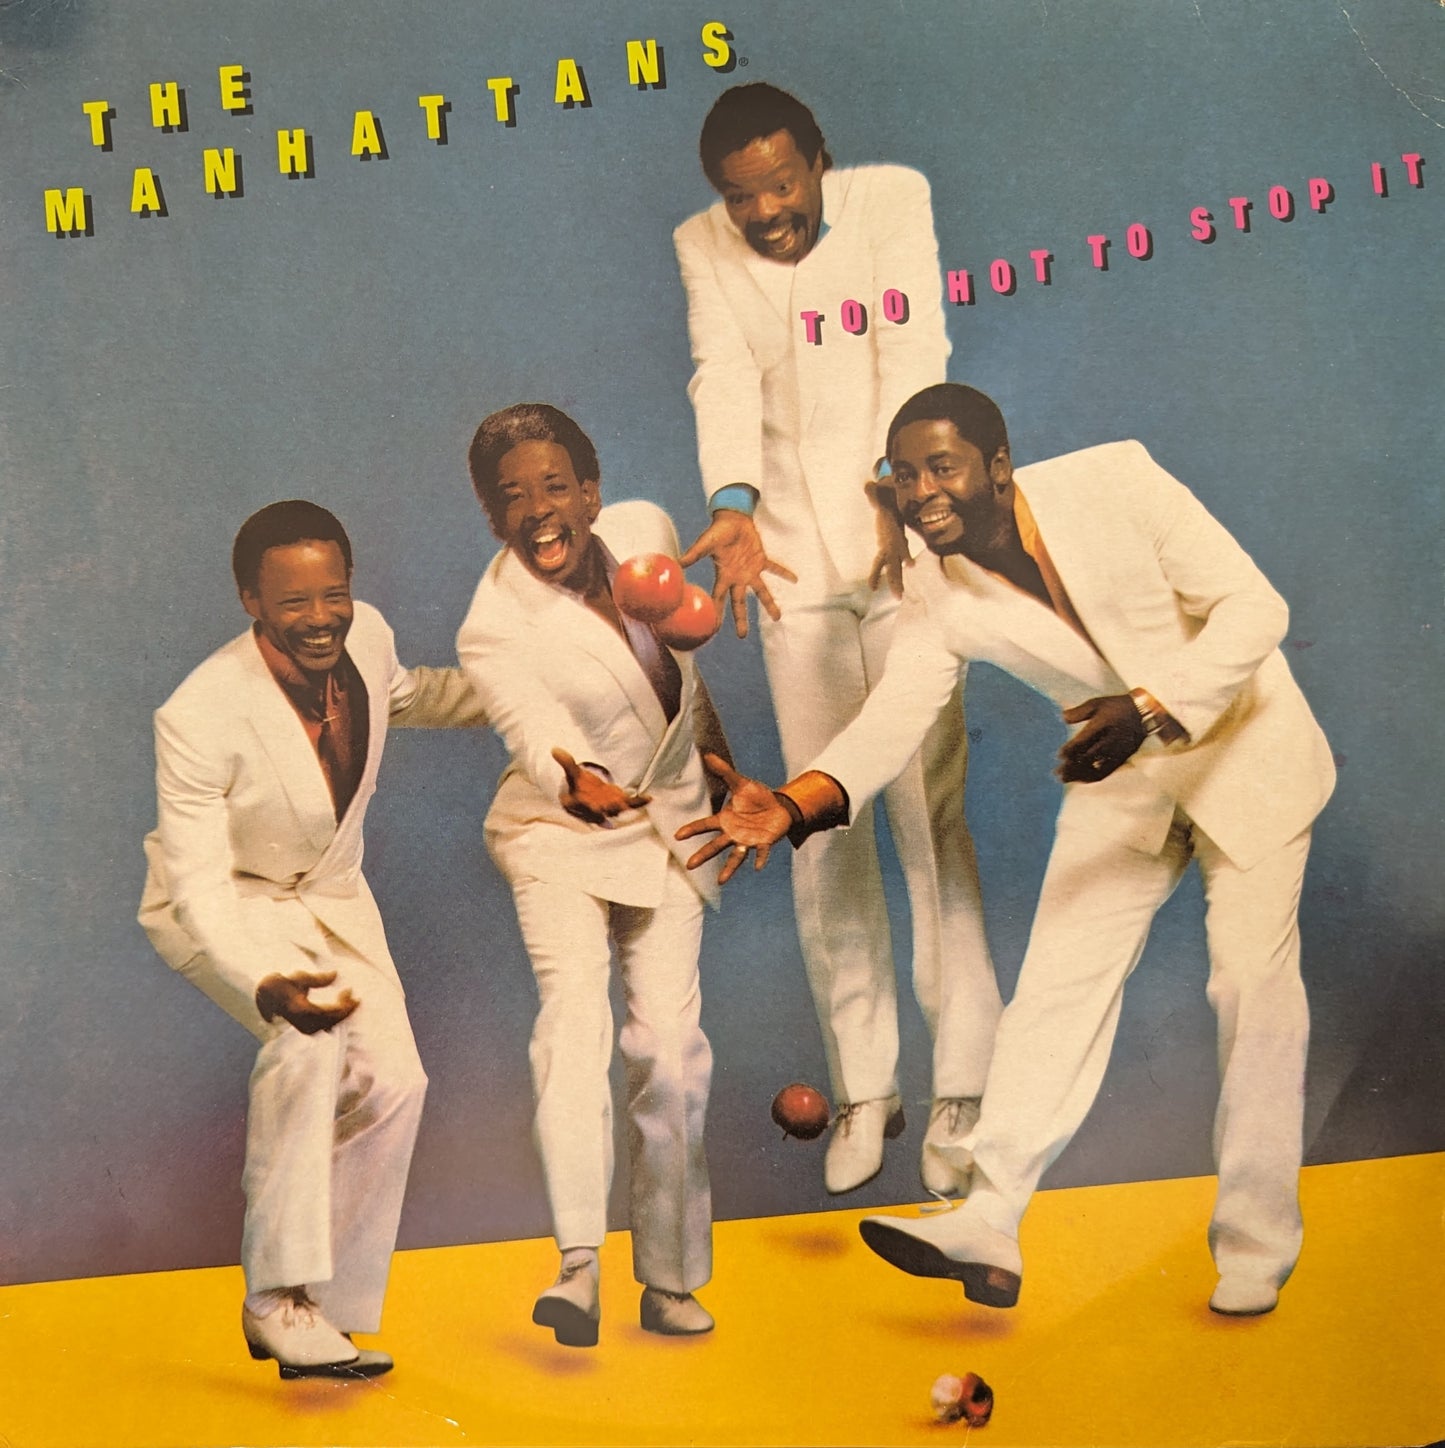 The Manhattans -  Too Hot to Stop It